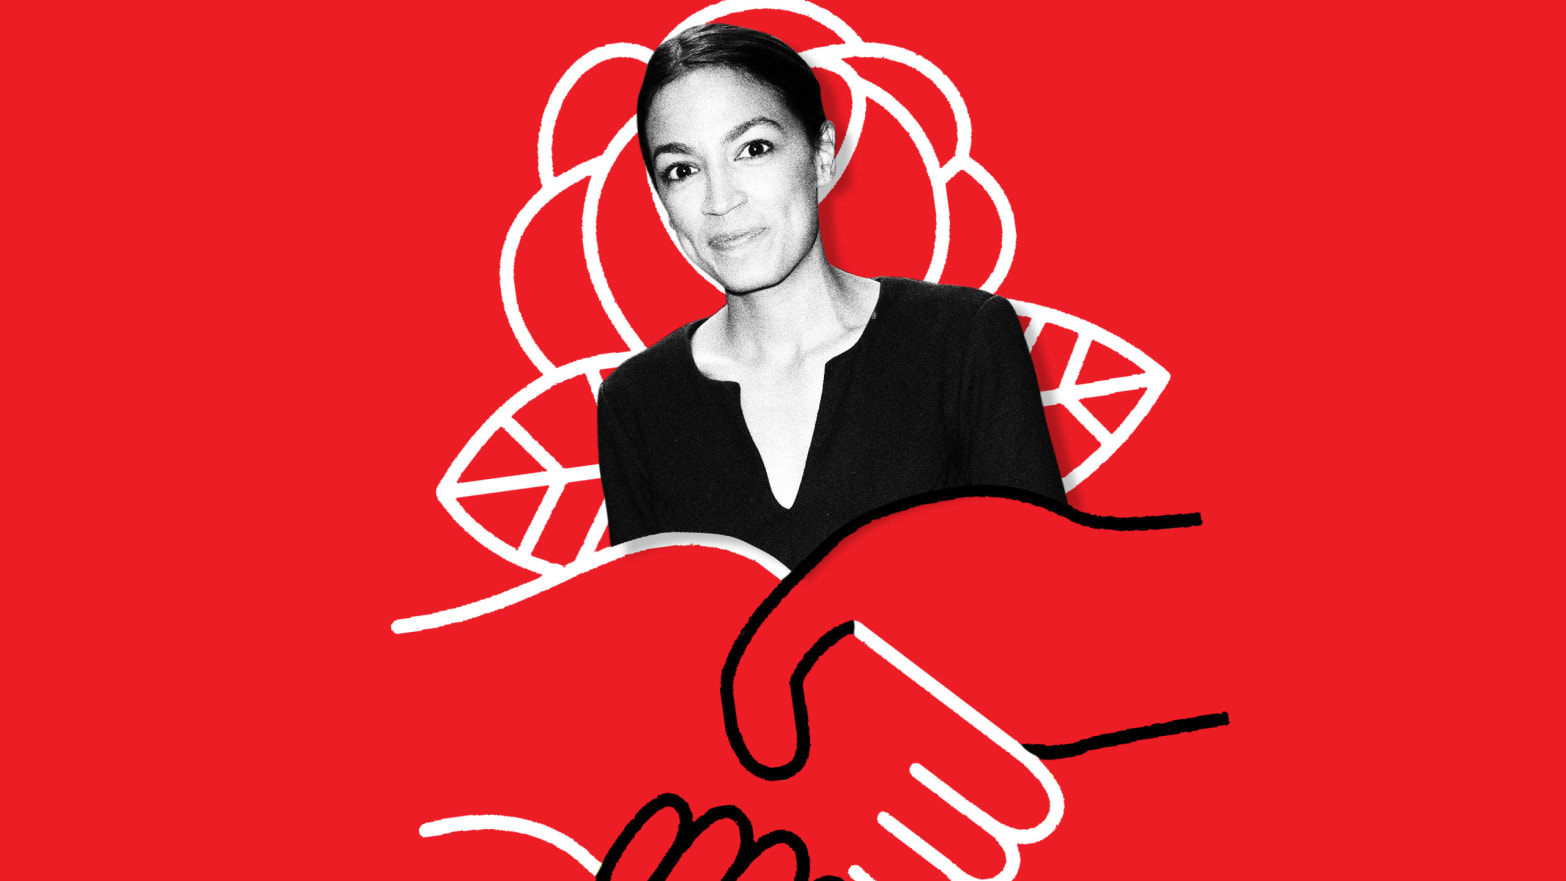 TALKING SOCIALISM  Catching up with AOC - Democratic Socialists